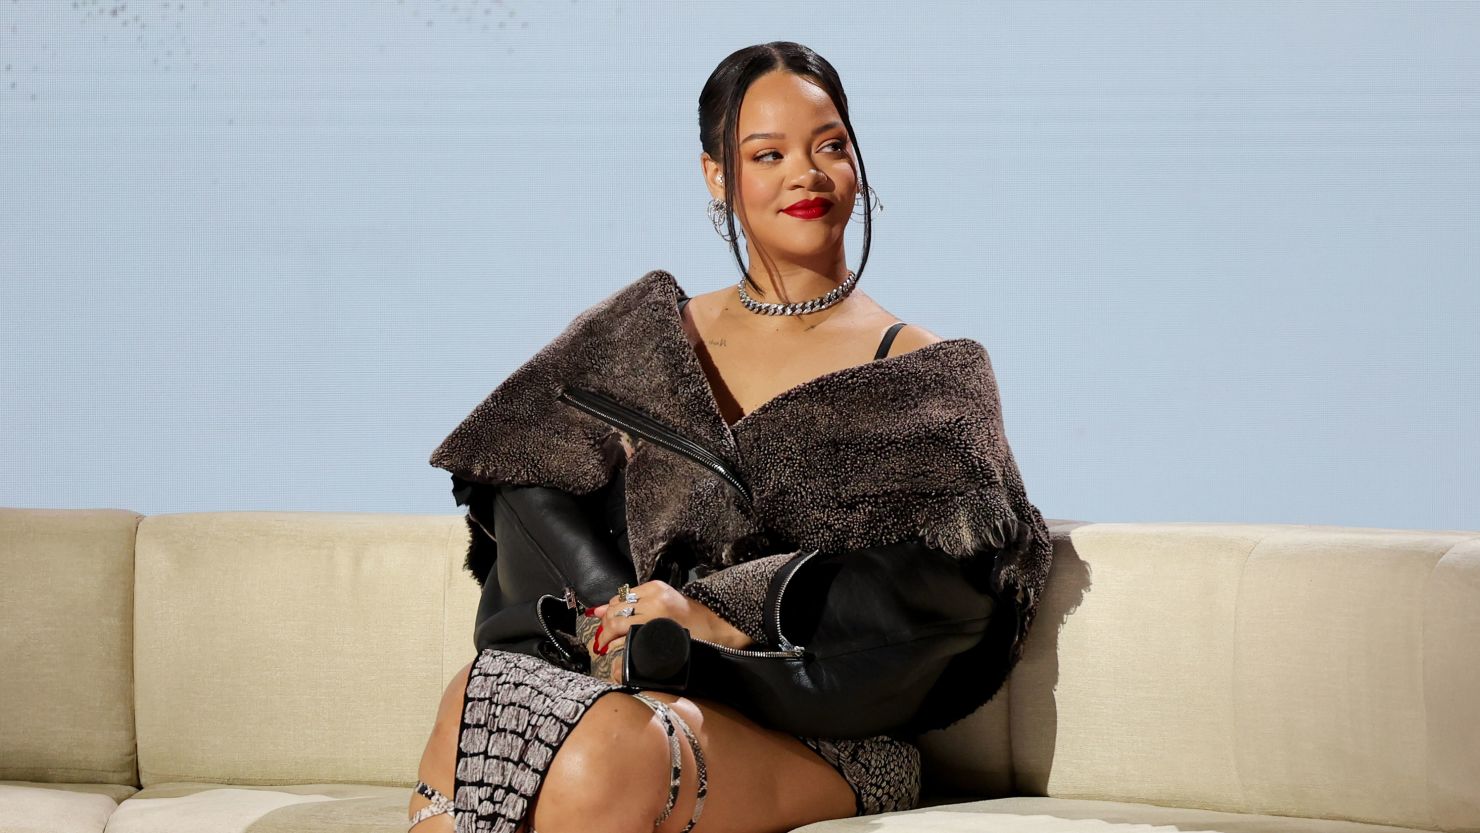 Rihanna at the Super Bowl LVII Halftime Show Press Conference held at Phoenix Convention Center on February 9.